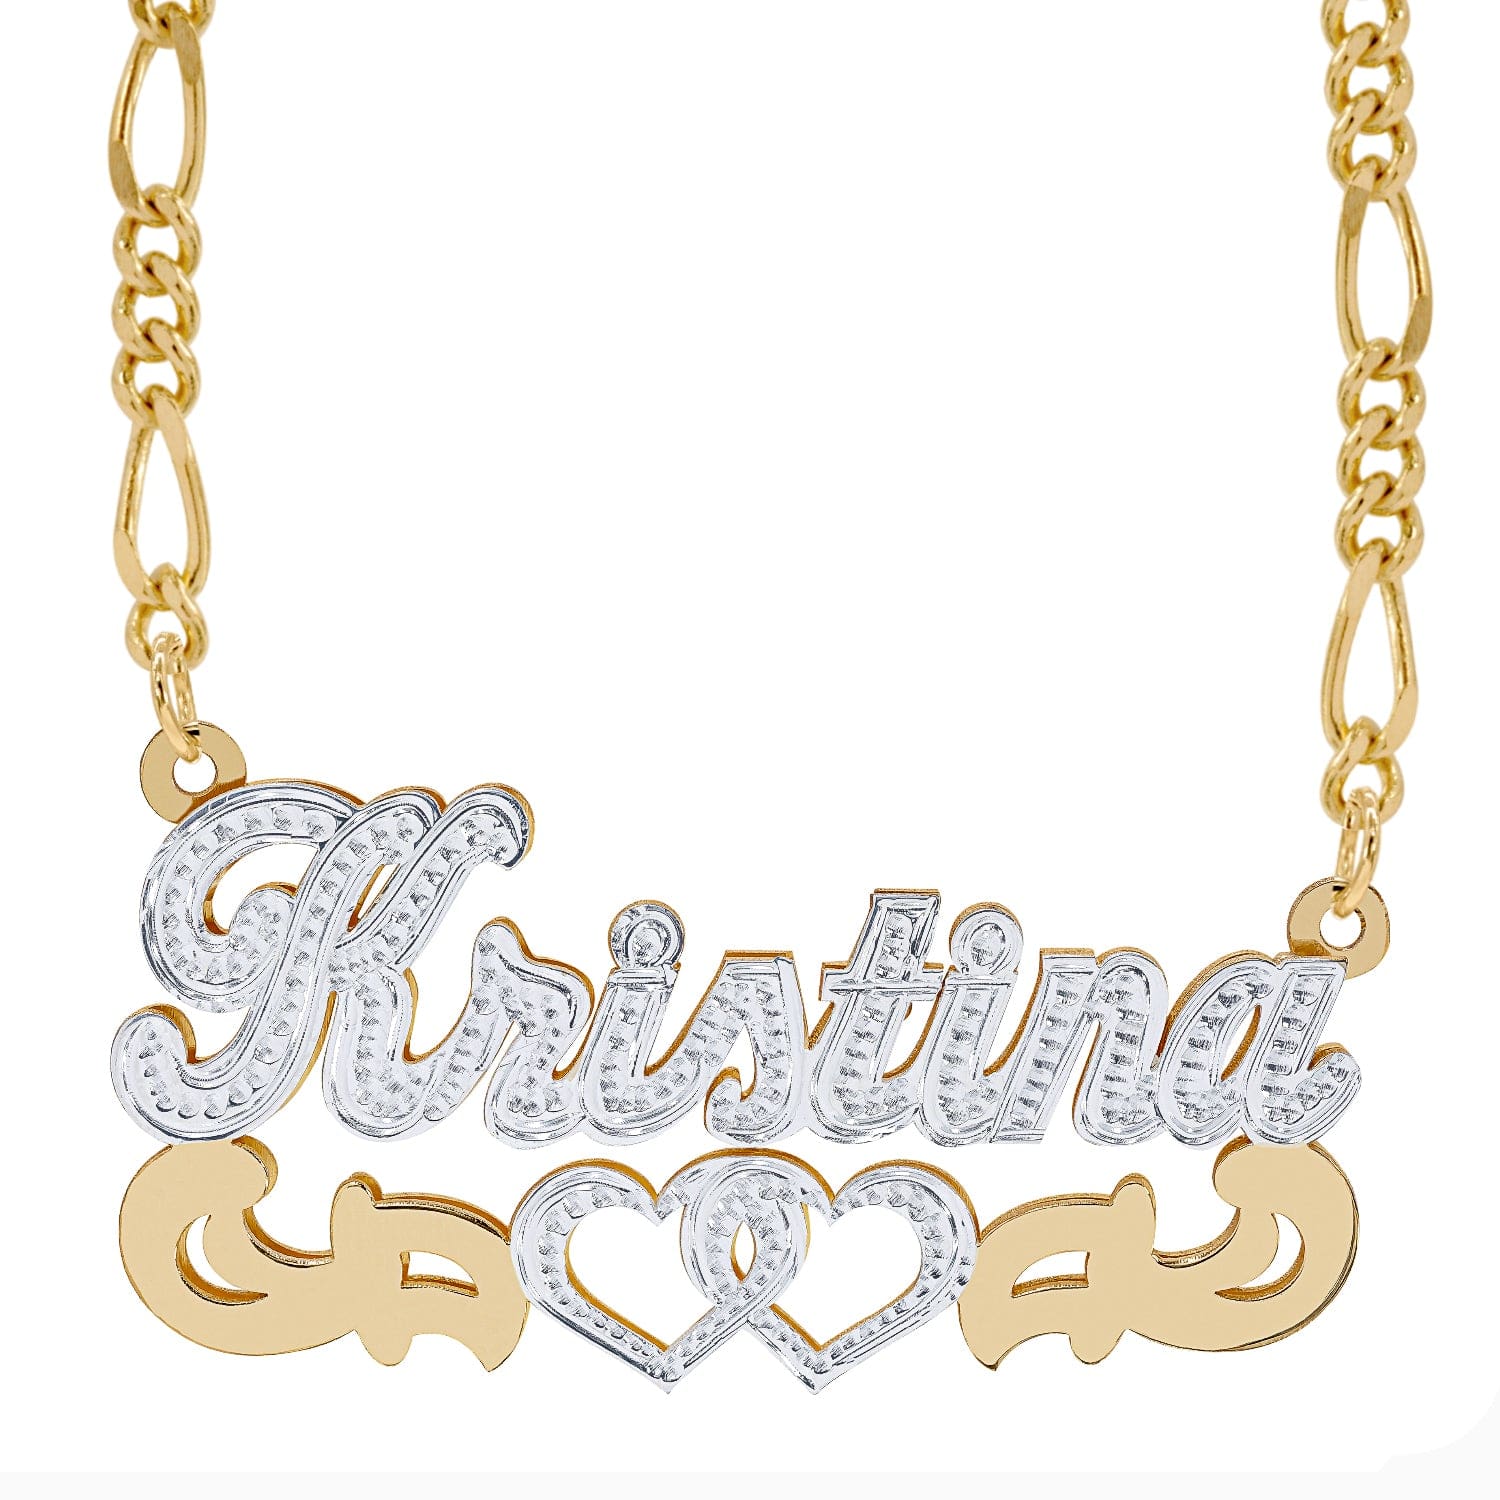 Two-Tone. Sterling Silver / Figaro chain Double Nameplate Necklace "Kristina" with Figaro chain